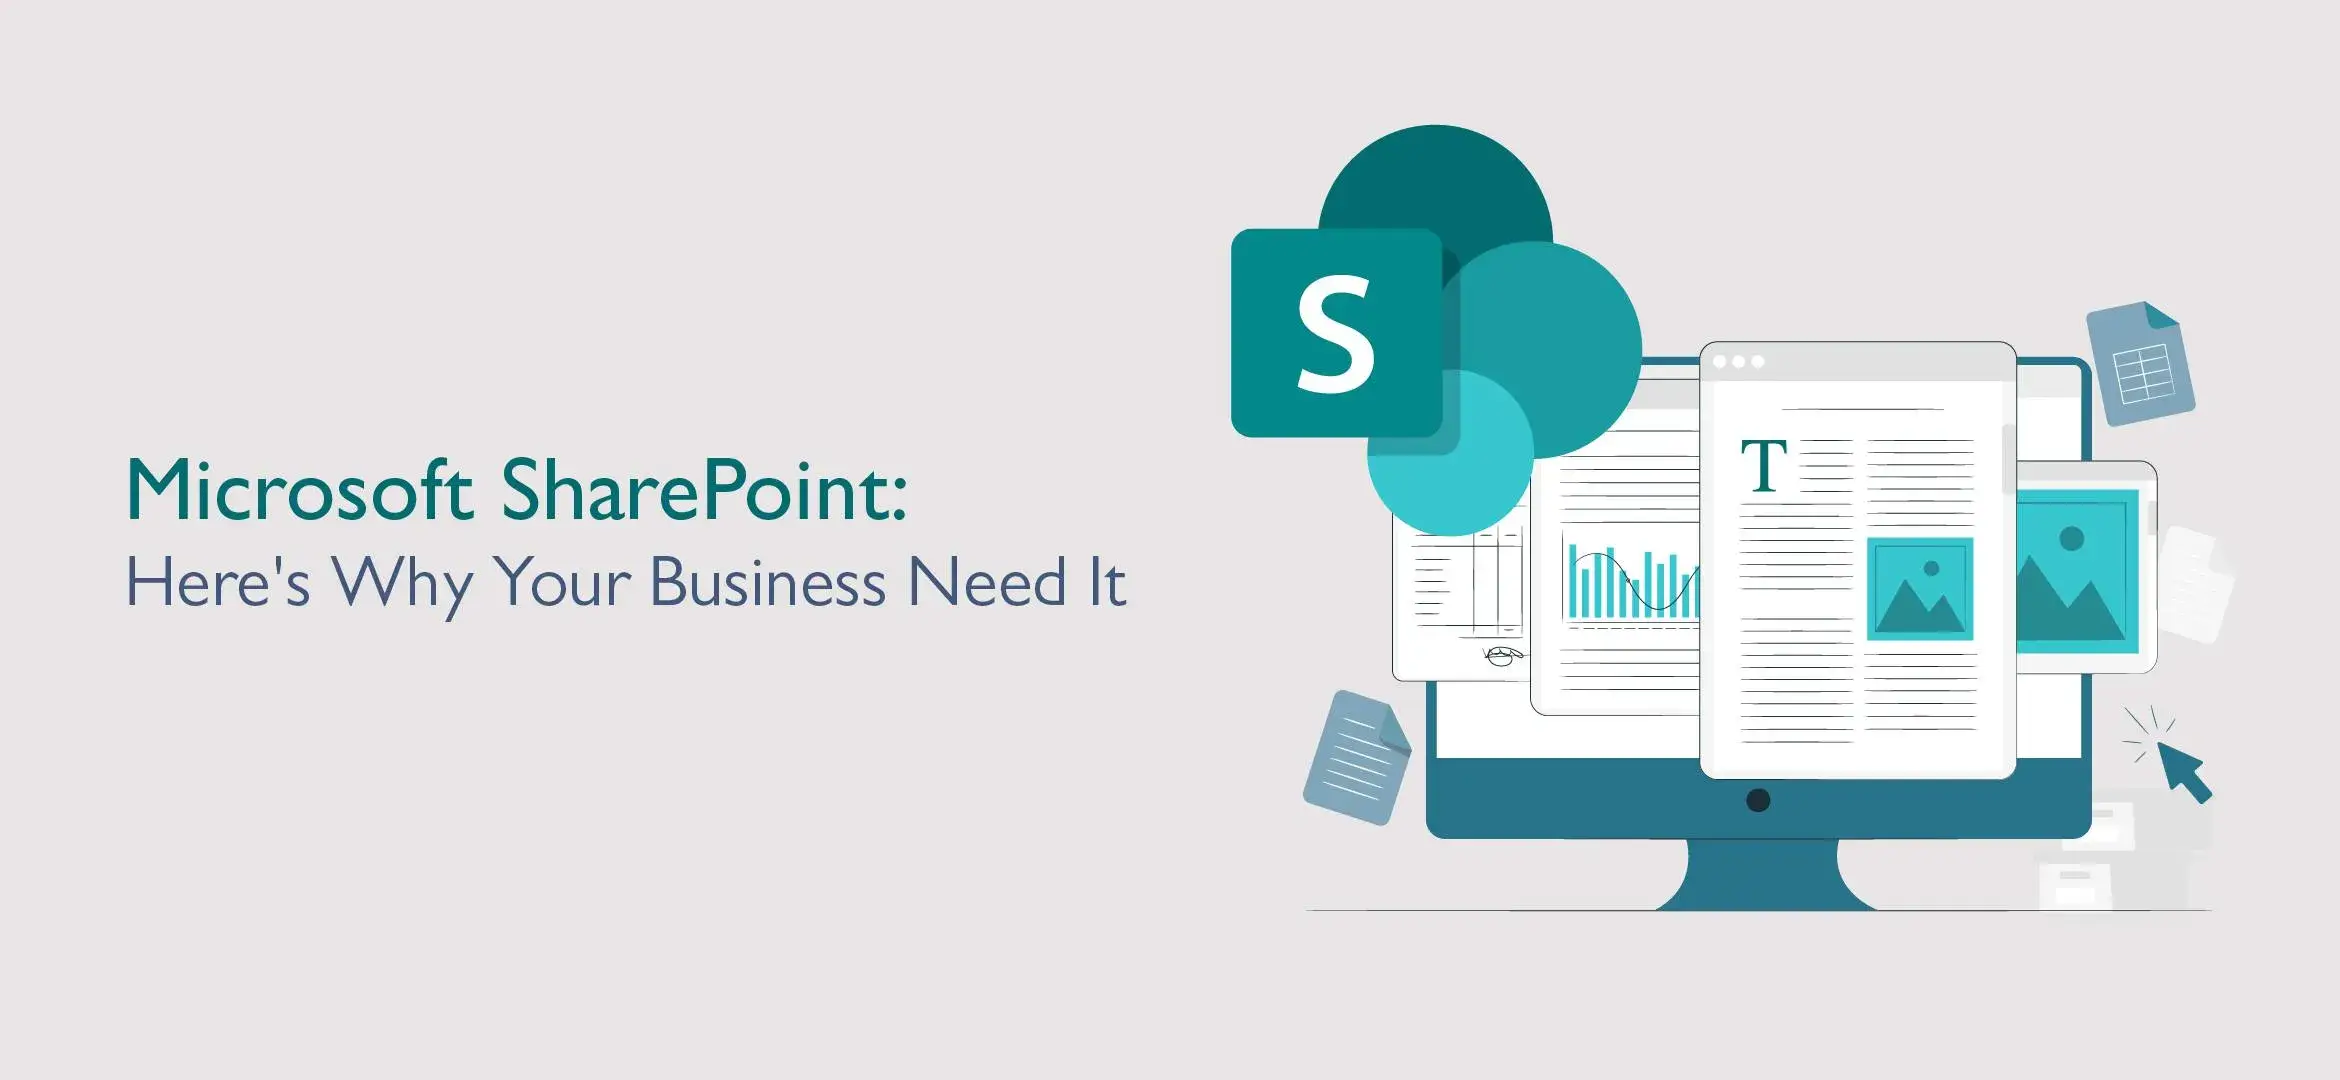 1712233214Microsoft SharePoint Here's Why Your Business Need It.webp